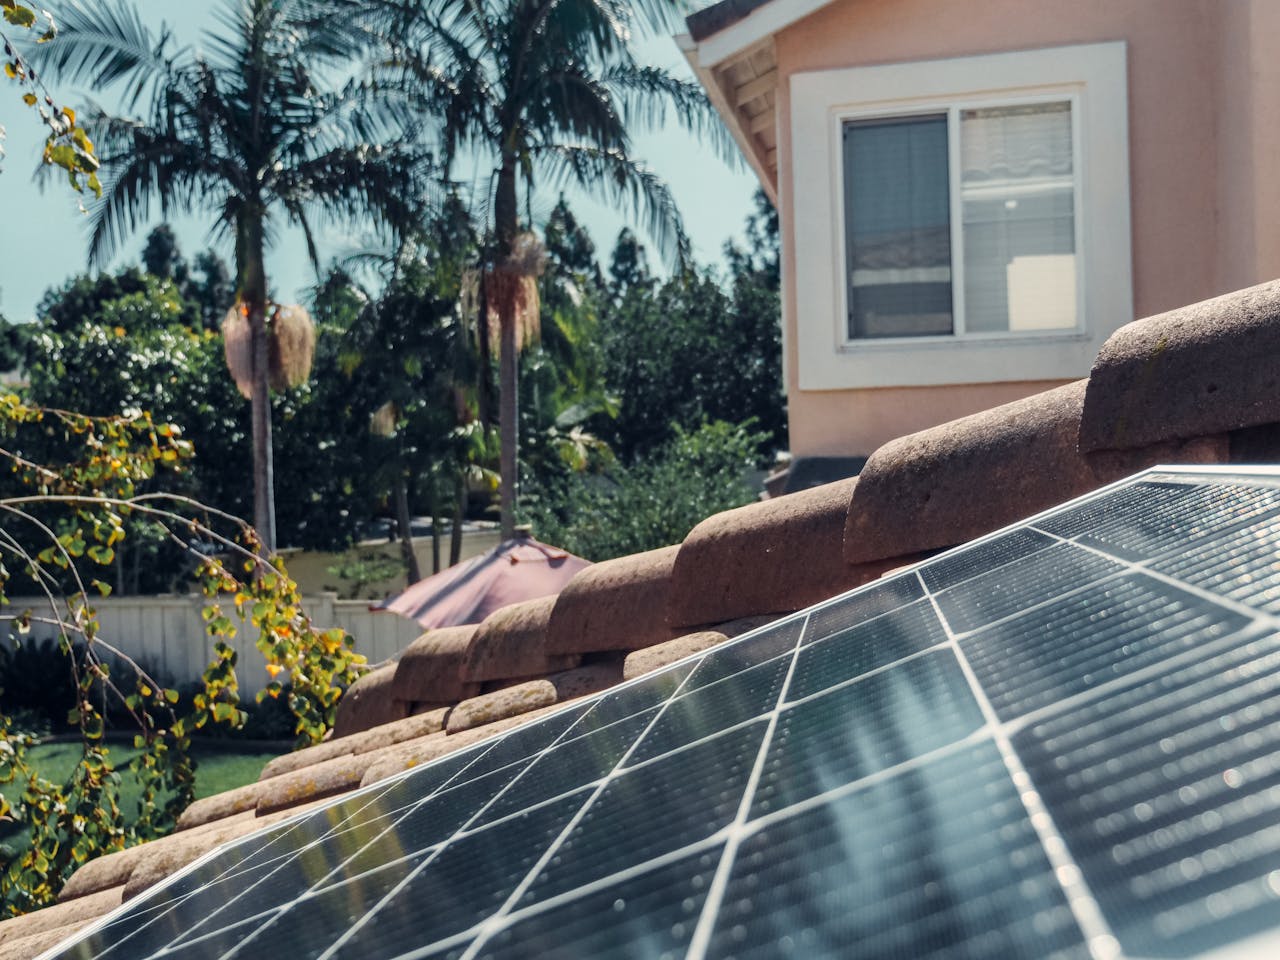 Off the Grid, On the Sun: How an Off-Grid Solar System Works